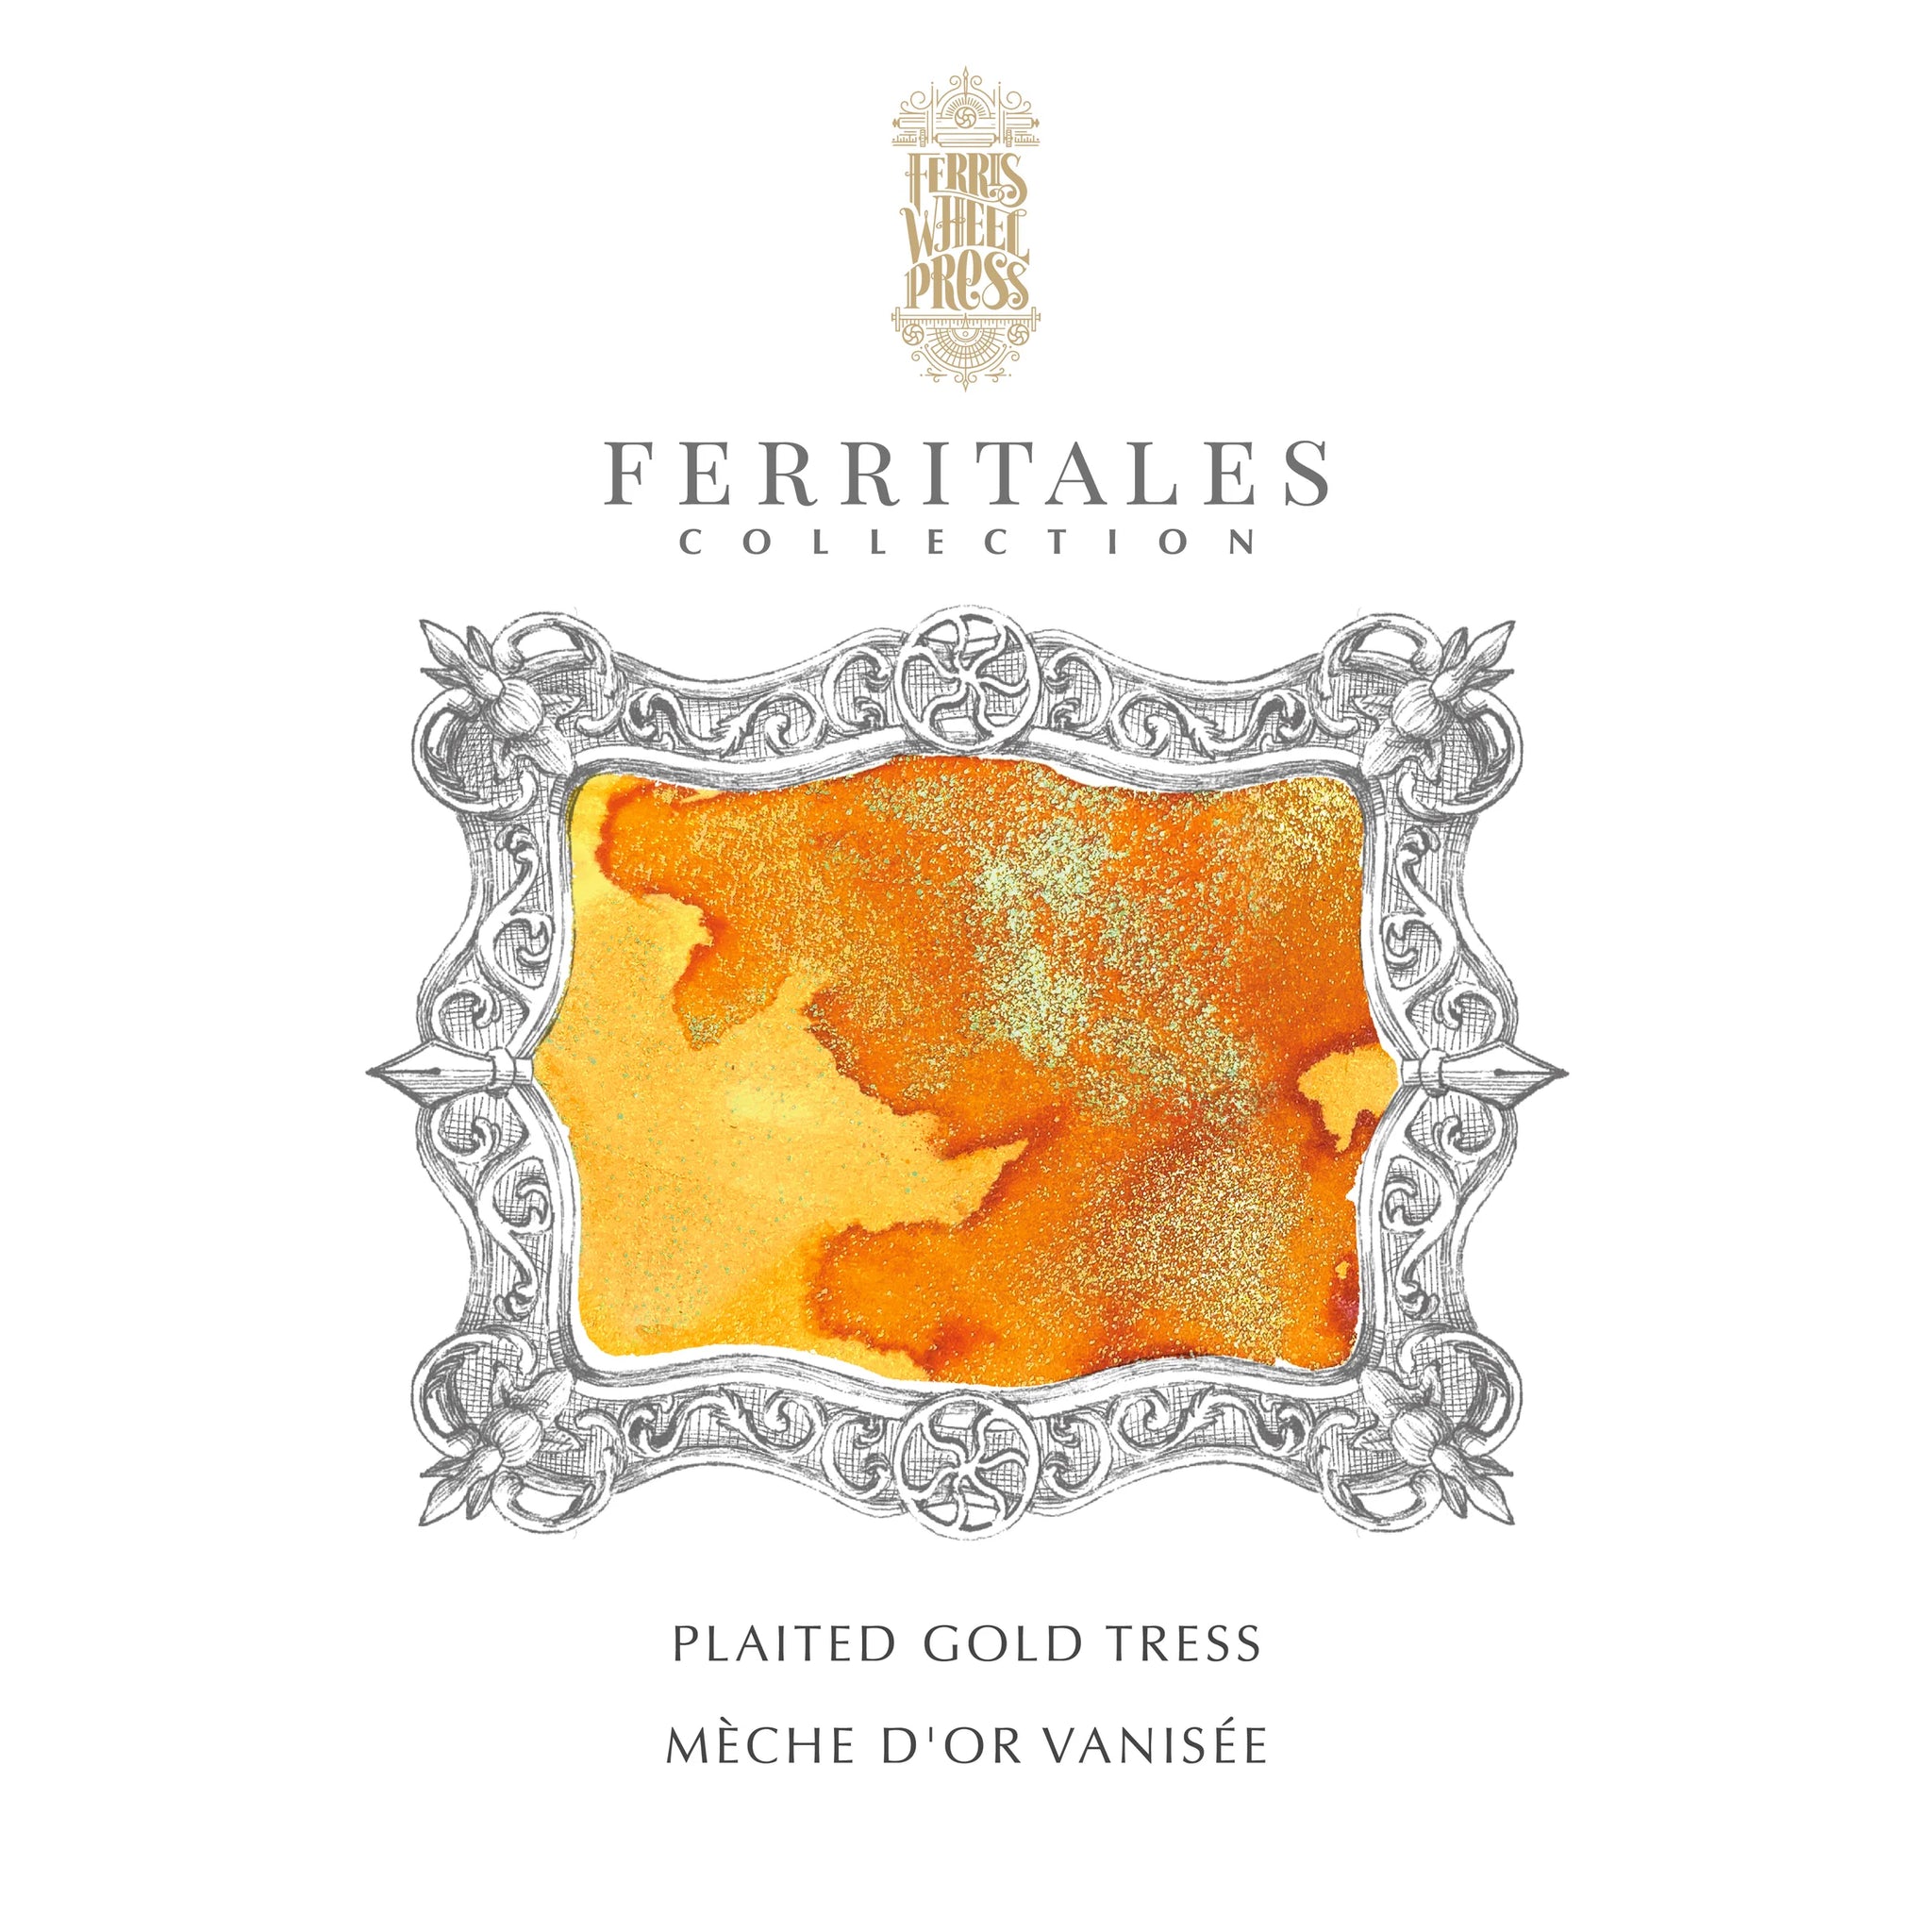 FerriTales™ Ferris Wheel Press | Once Upon a Time | Plaited Gold Tress 20ml